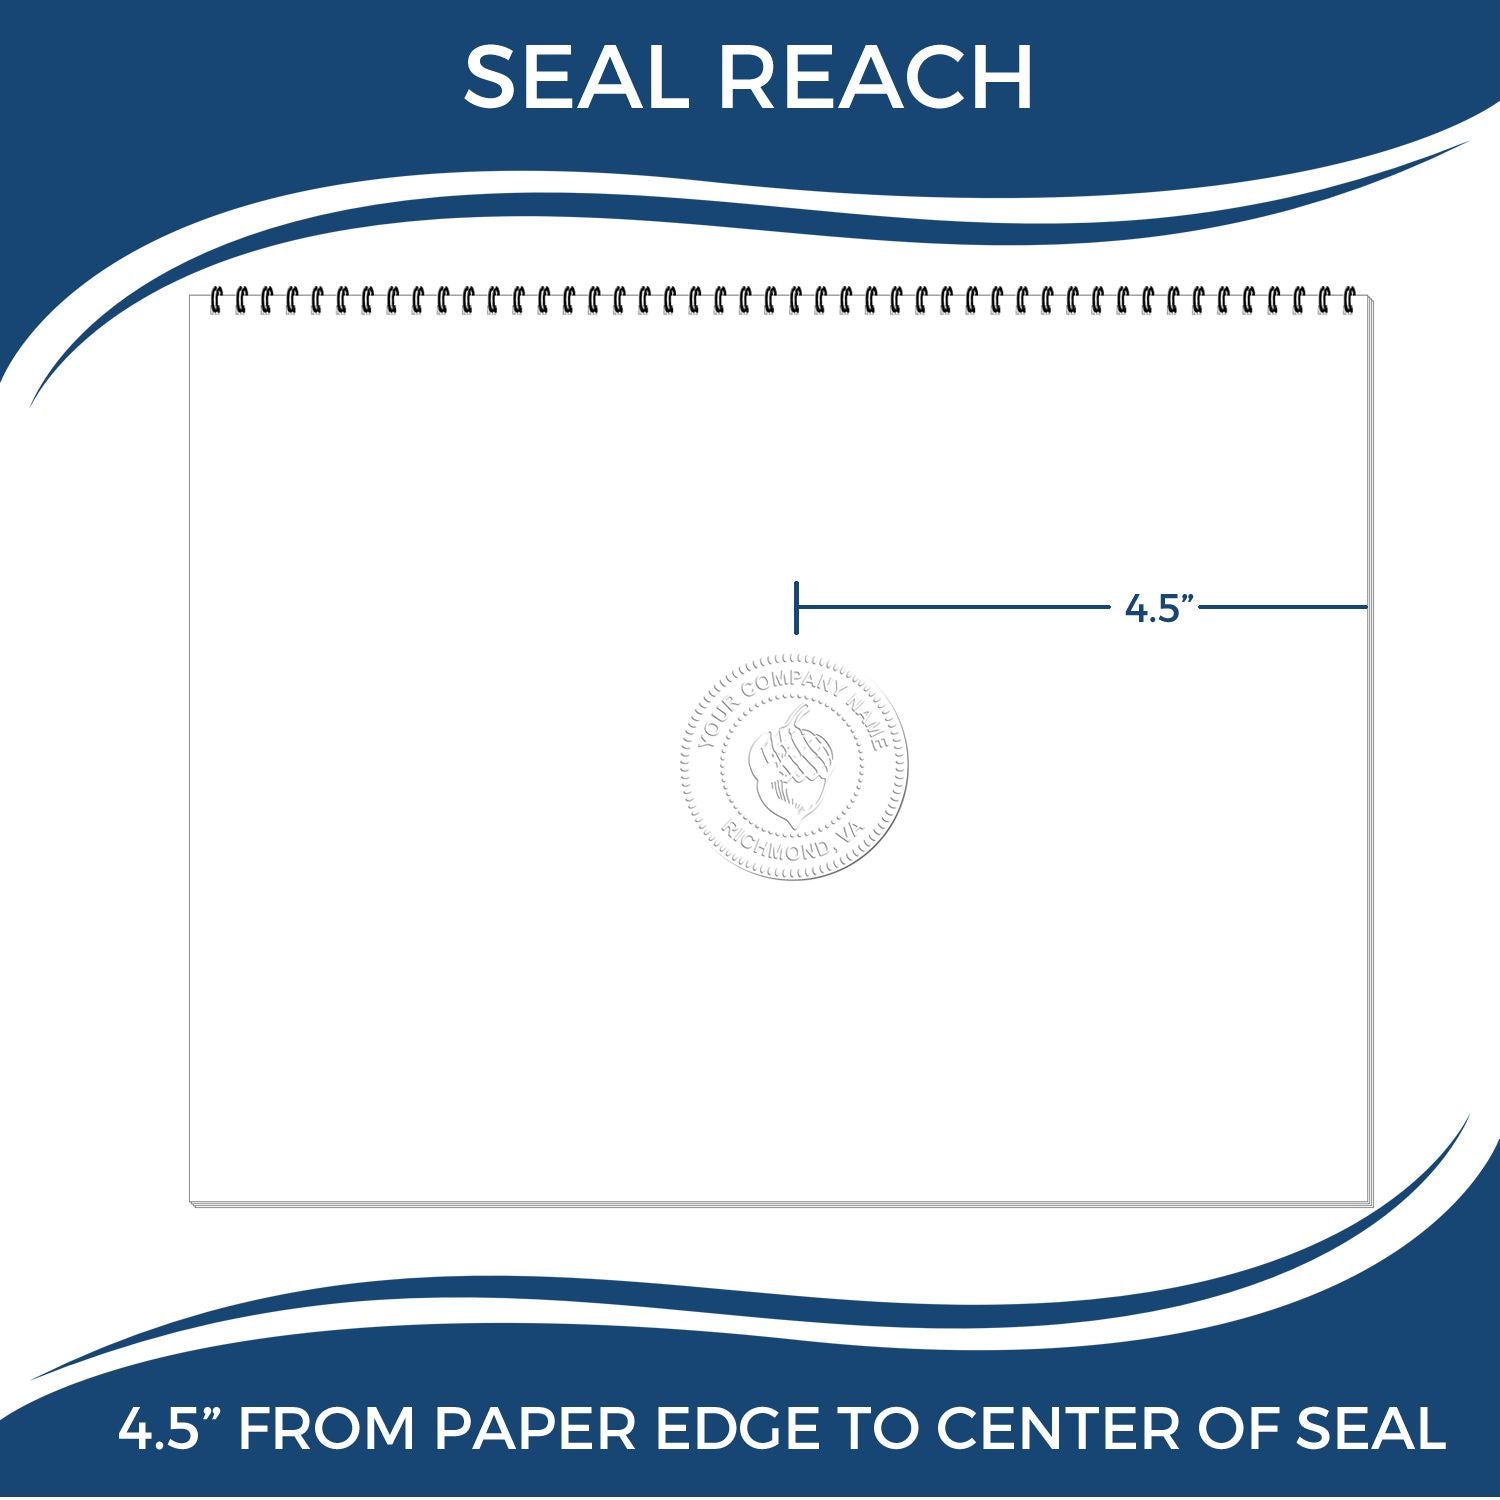 An infographic showing the seal reach which is represented by a ruler and a miniature seal image of the State of New Hampshire Extended Long Reach Geologist Seal